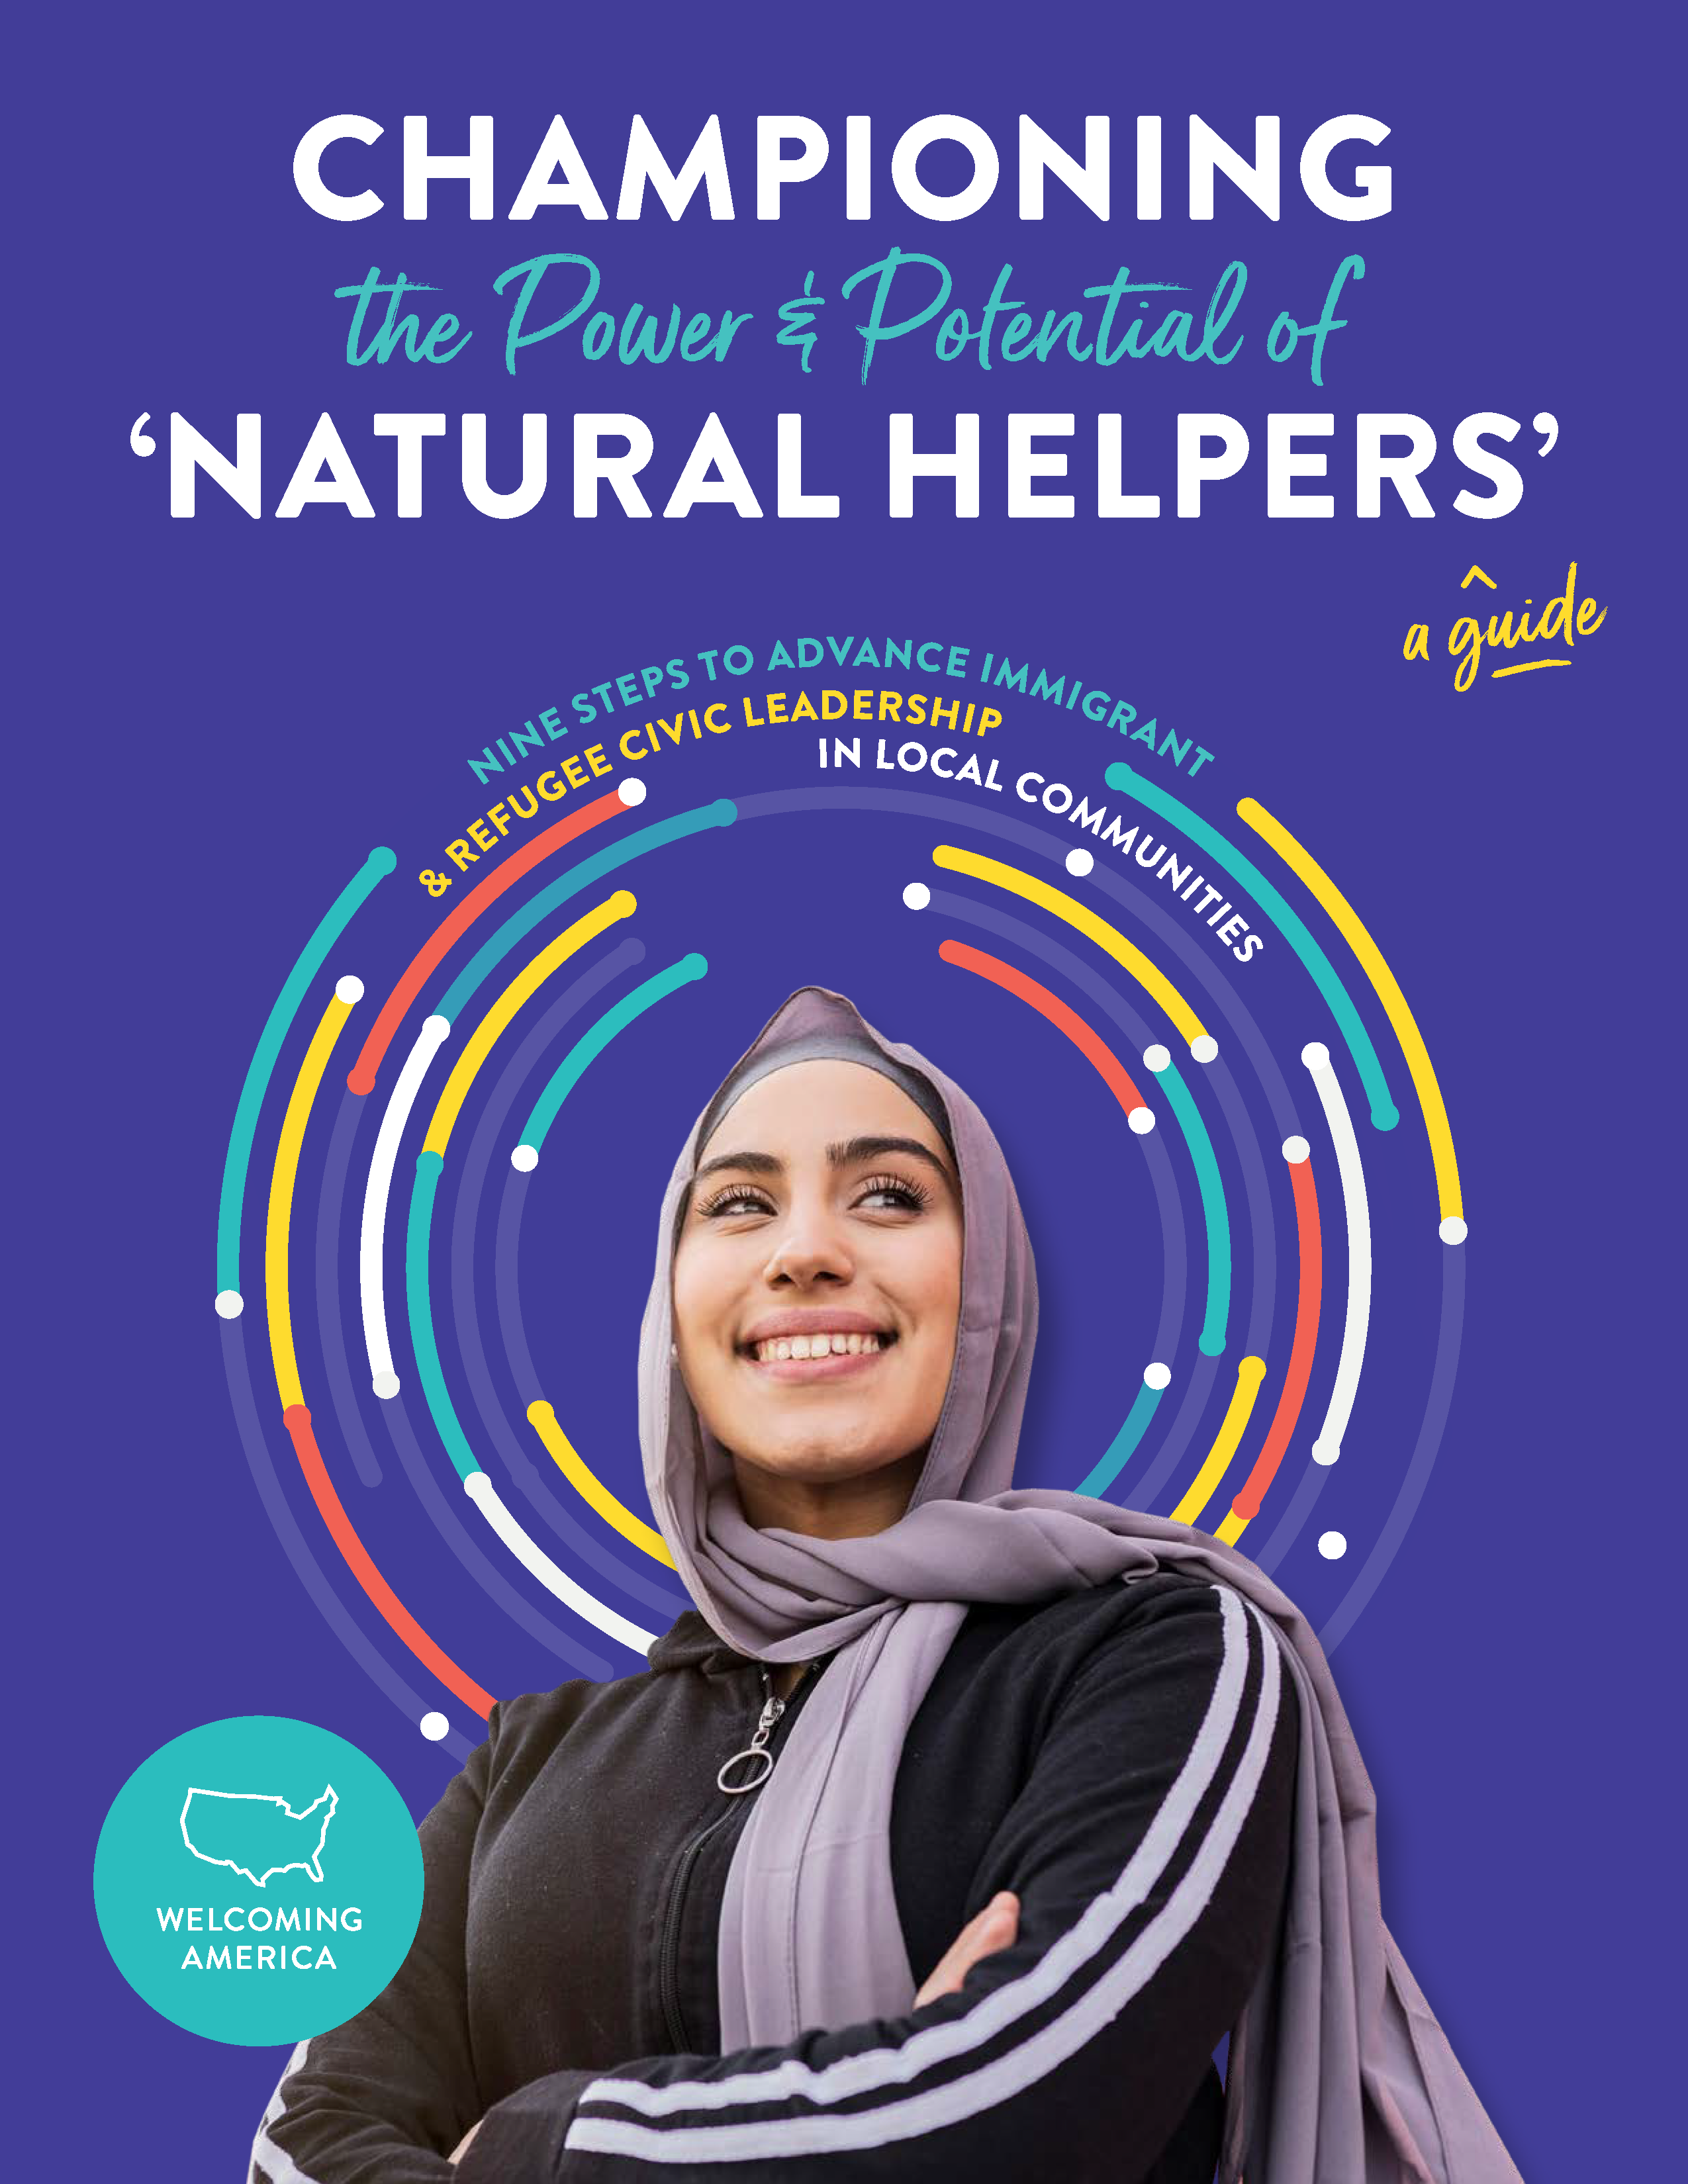 Championing the Power & Potential of Natural Helpers: A Guide. Nine steps to advance immigrant and refugee inclusion in local communities